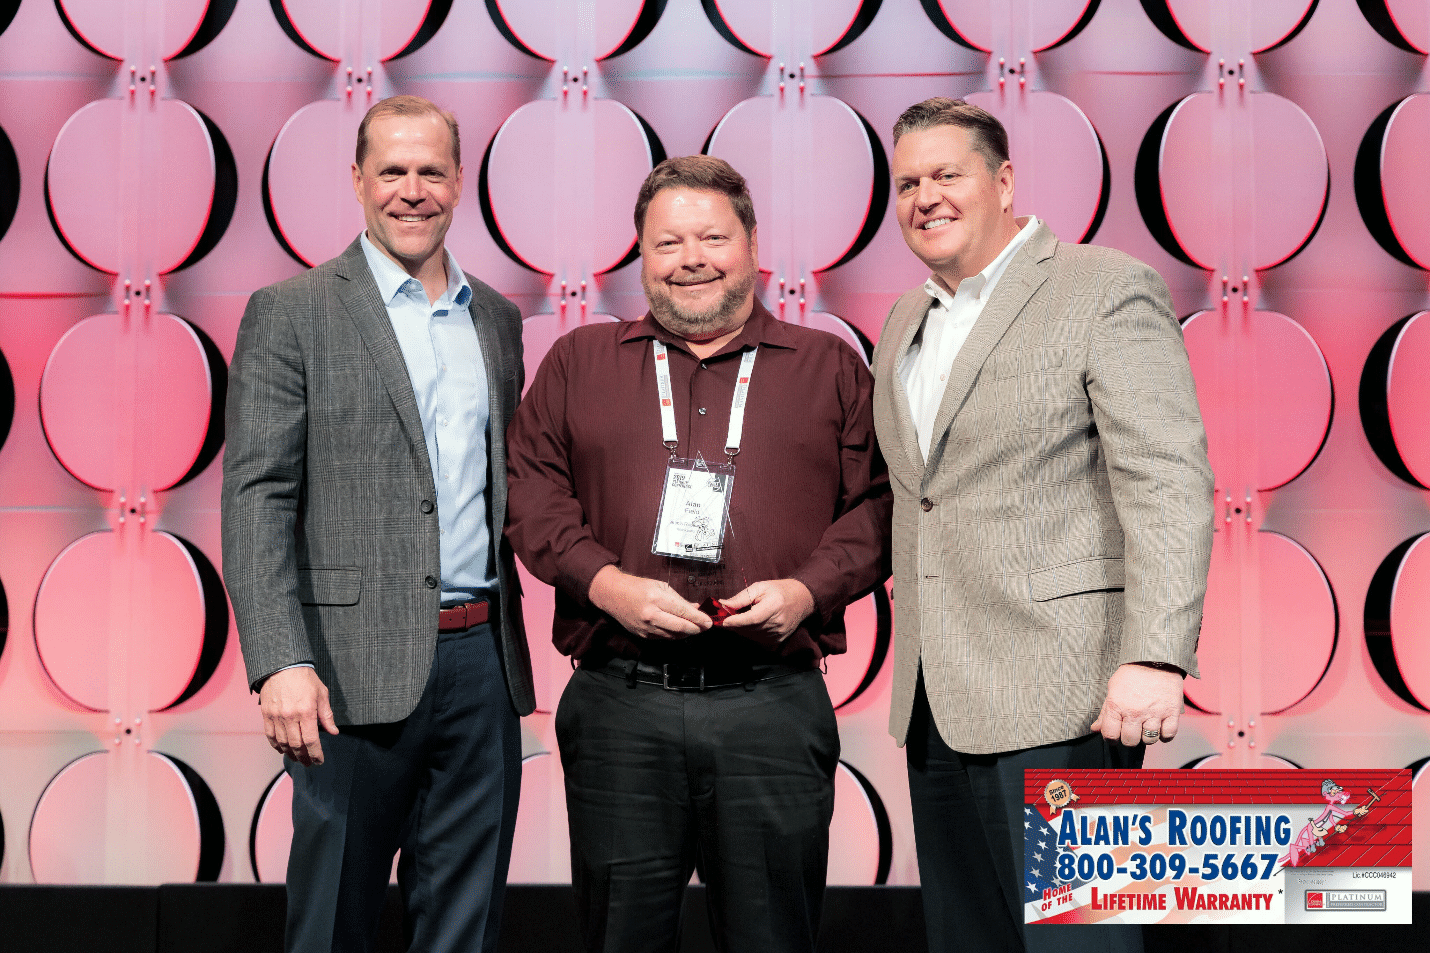 Alan's Roofing: 2019 Top Performer Award Winner from Owens Corning